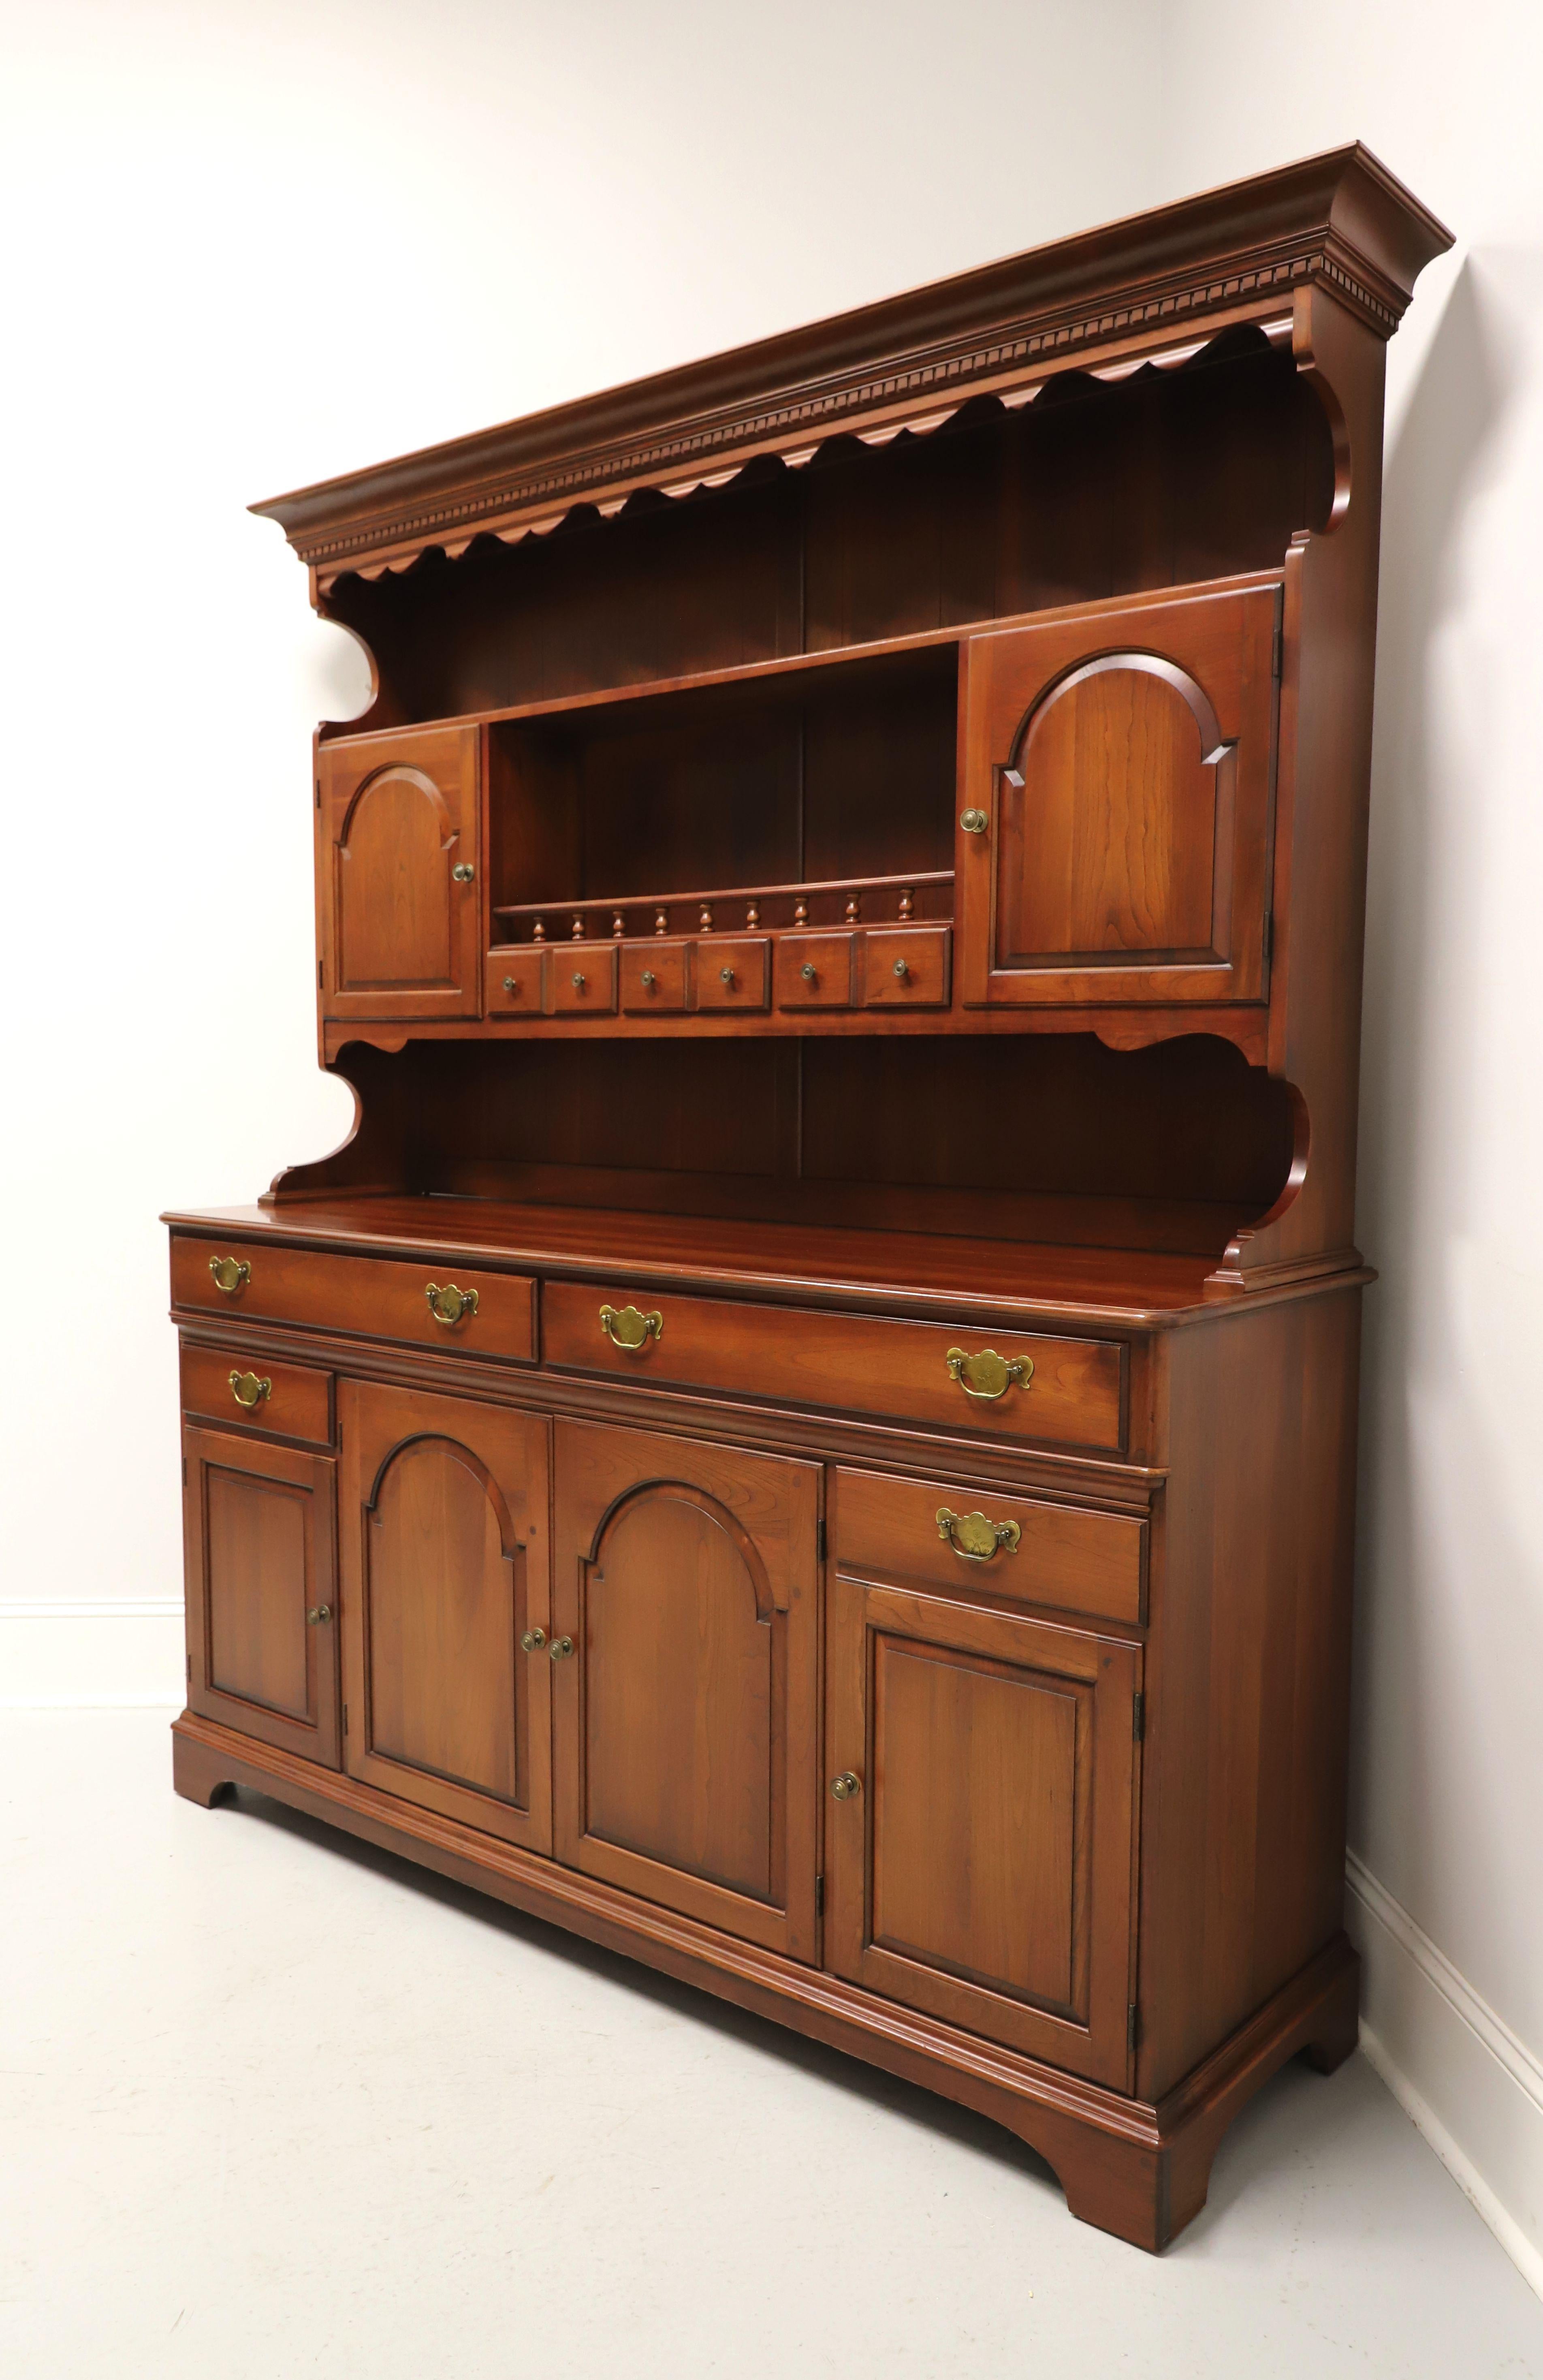 American Colonial PENNSYLVANIA HOUSE Solid Cherry Colonial Farmhouse Hutch For Sale